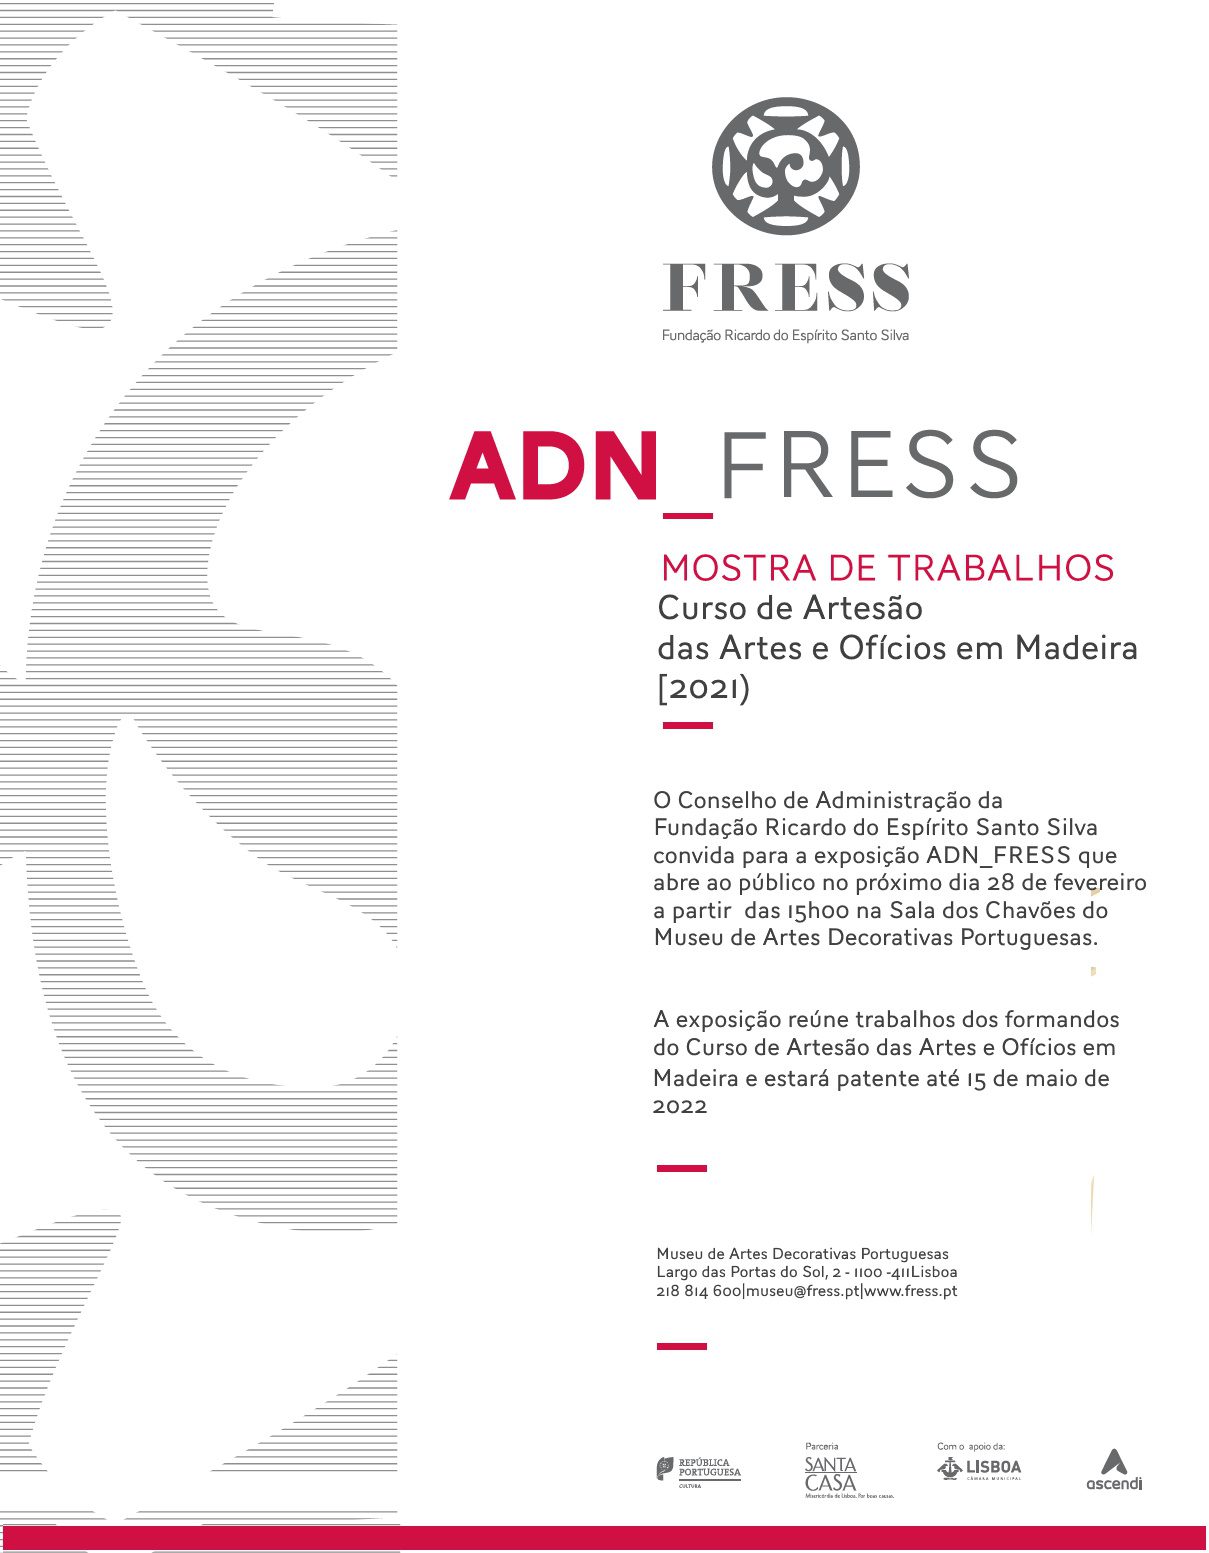 ADN_FRESS exhibition opens to the public on 28 February